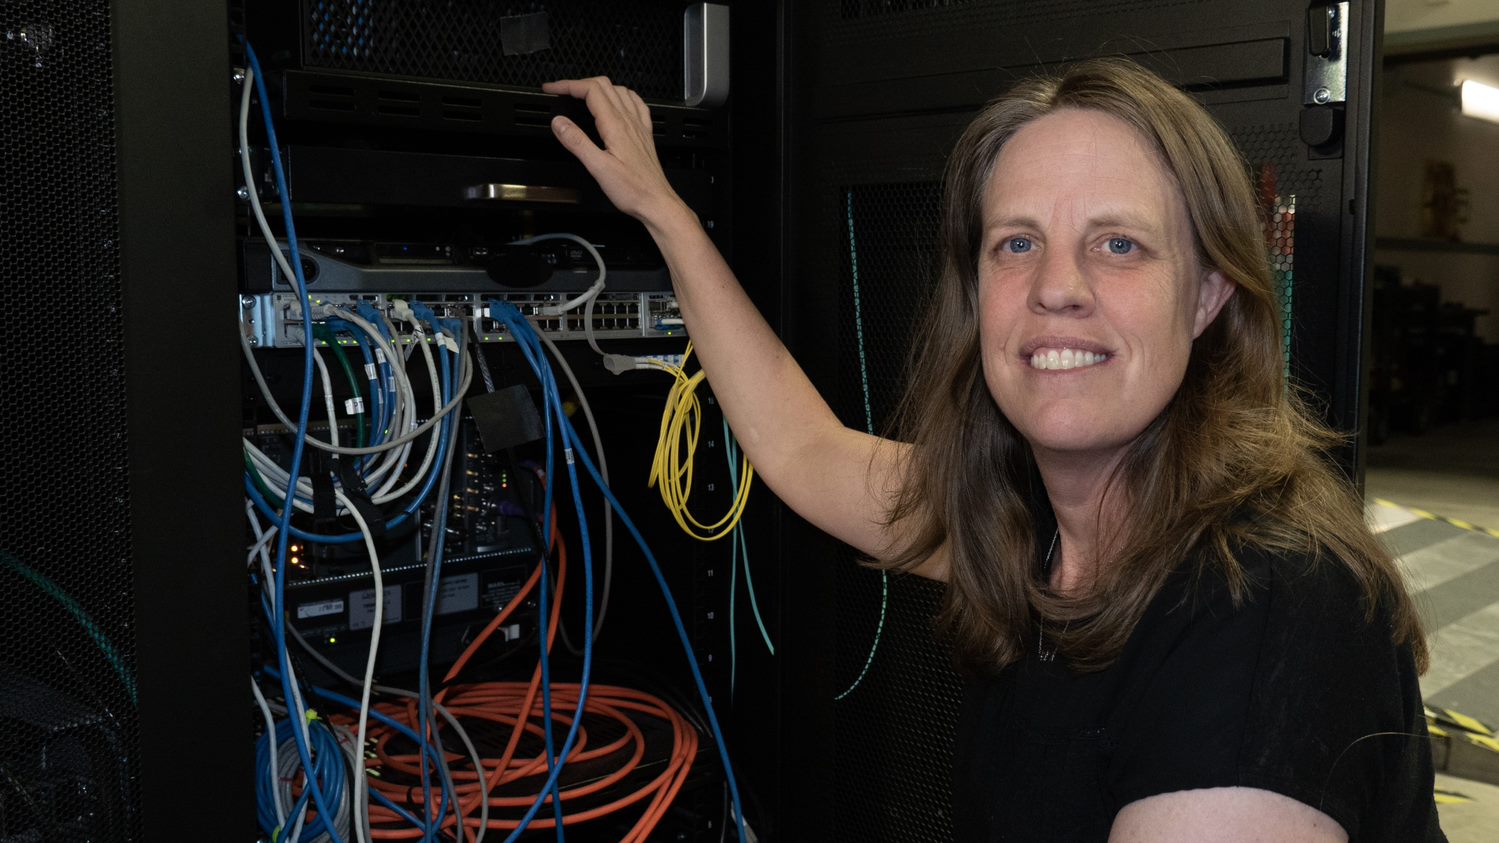 Jeanne Quimby crouches next to a rack of computer equipment with many different colored cord connections. 